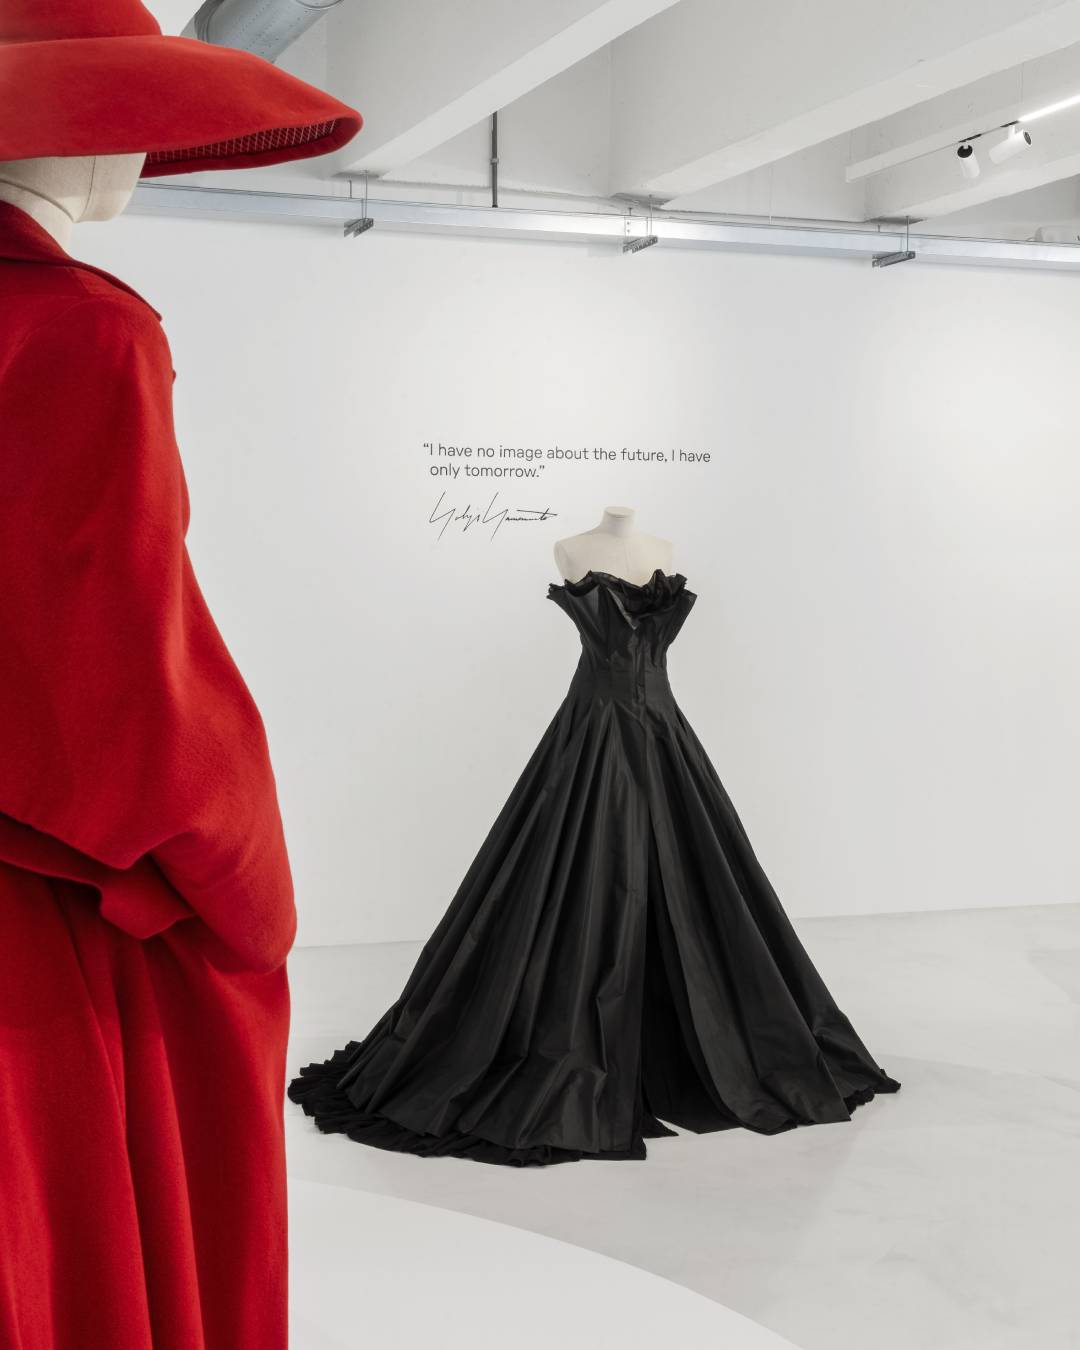 Yohji Yamamoto's new exhibition is an ode to the future  It is entitled 'Letter to the future' and comprises 25 dresses 